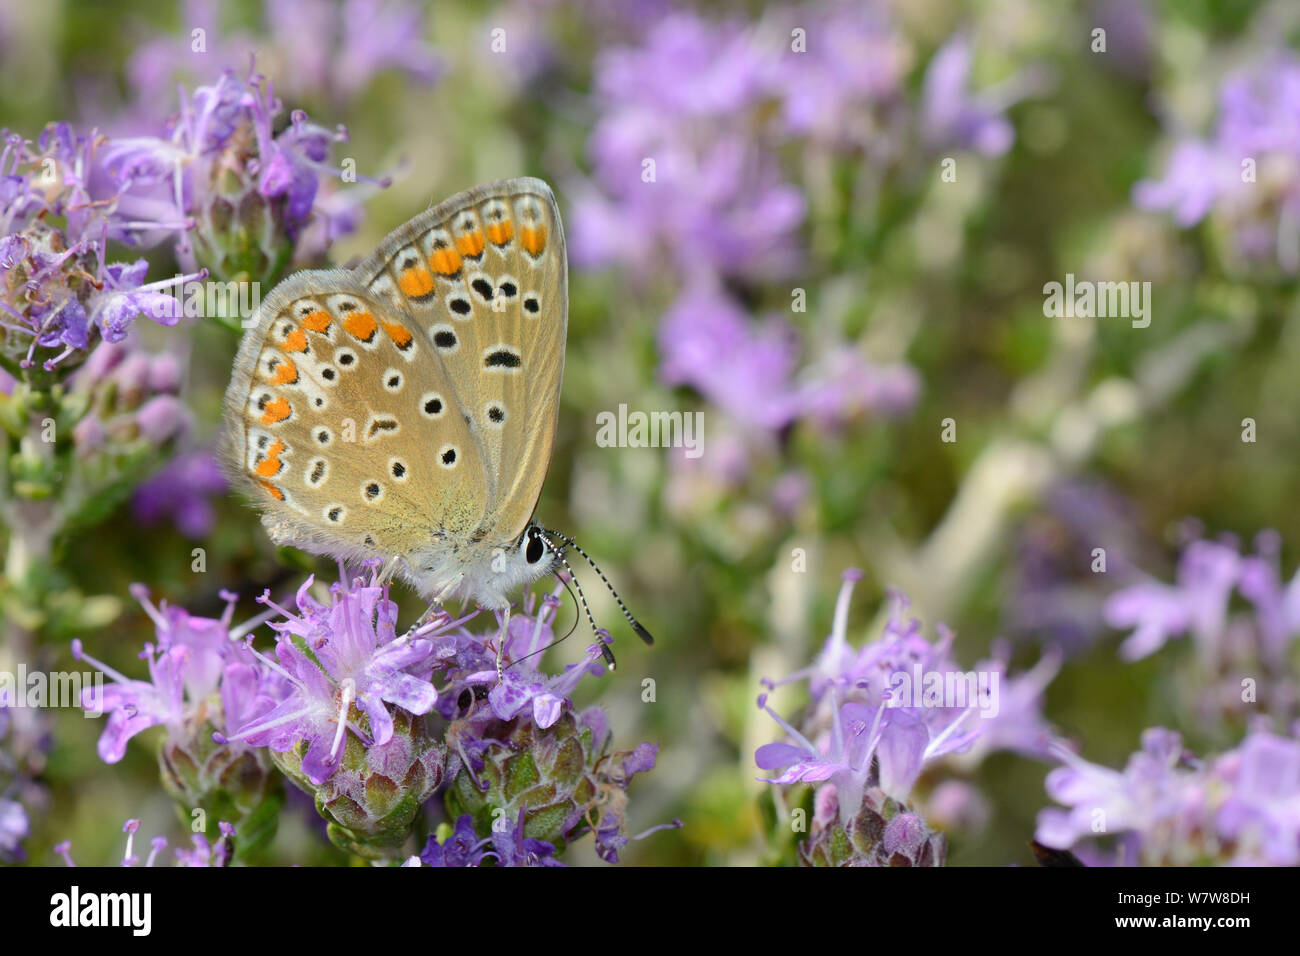 Female Common blue butterfly (Polyommatus icarus) nectaring on Headed thyme / Wild thyme flowers (Thymus capitatus), Vai, Crete, Greece, May. Stock Photo